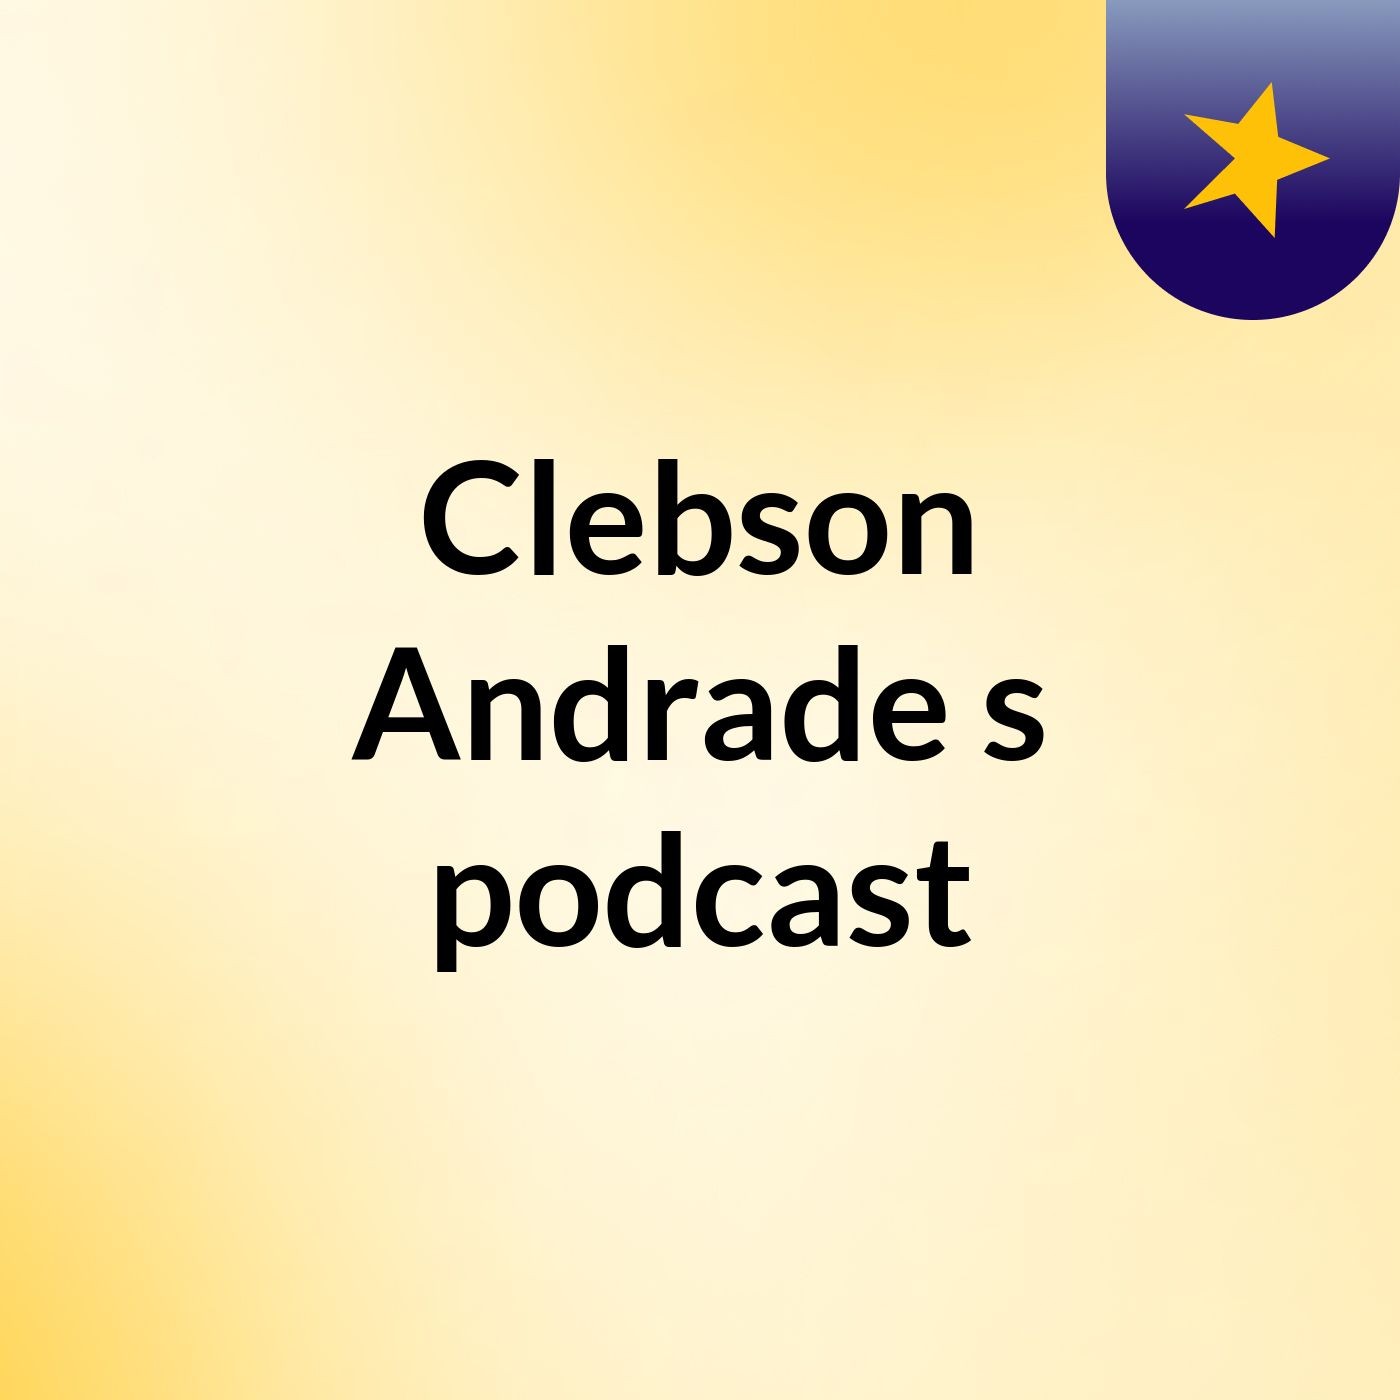 Clebson Andrade's podcast